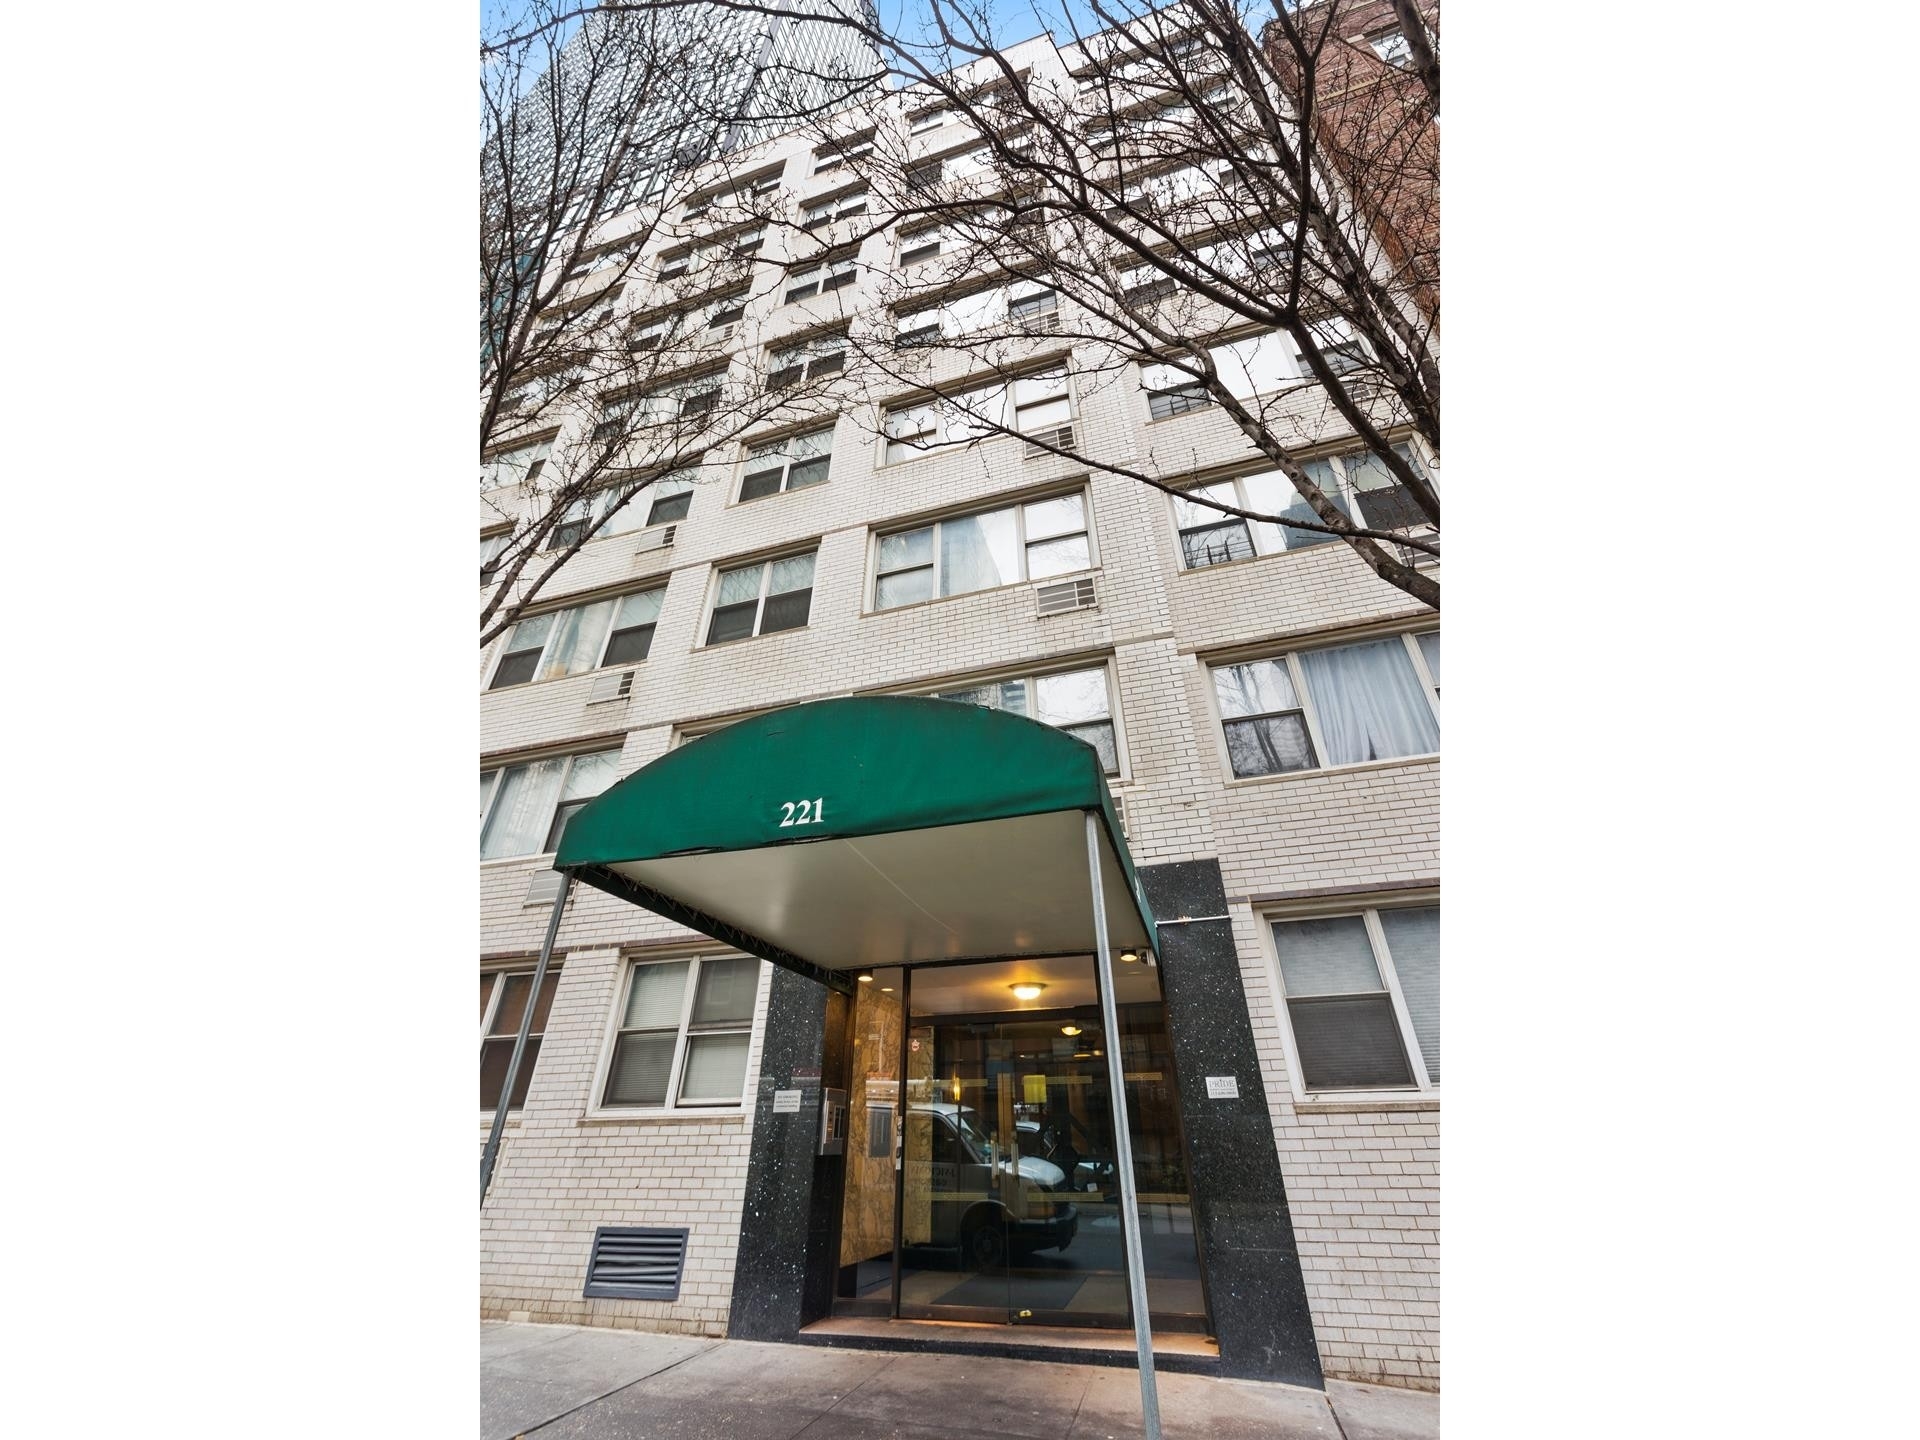 1. BOWERT COURT building at 221 East 50th, Turtle Bay, New York, NY